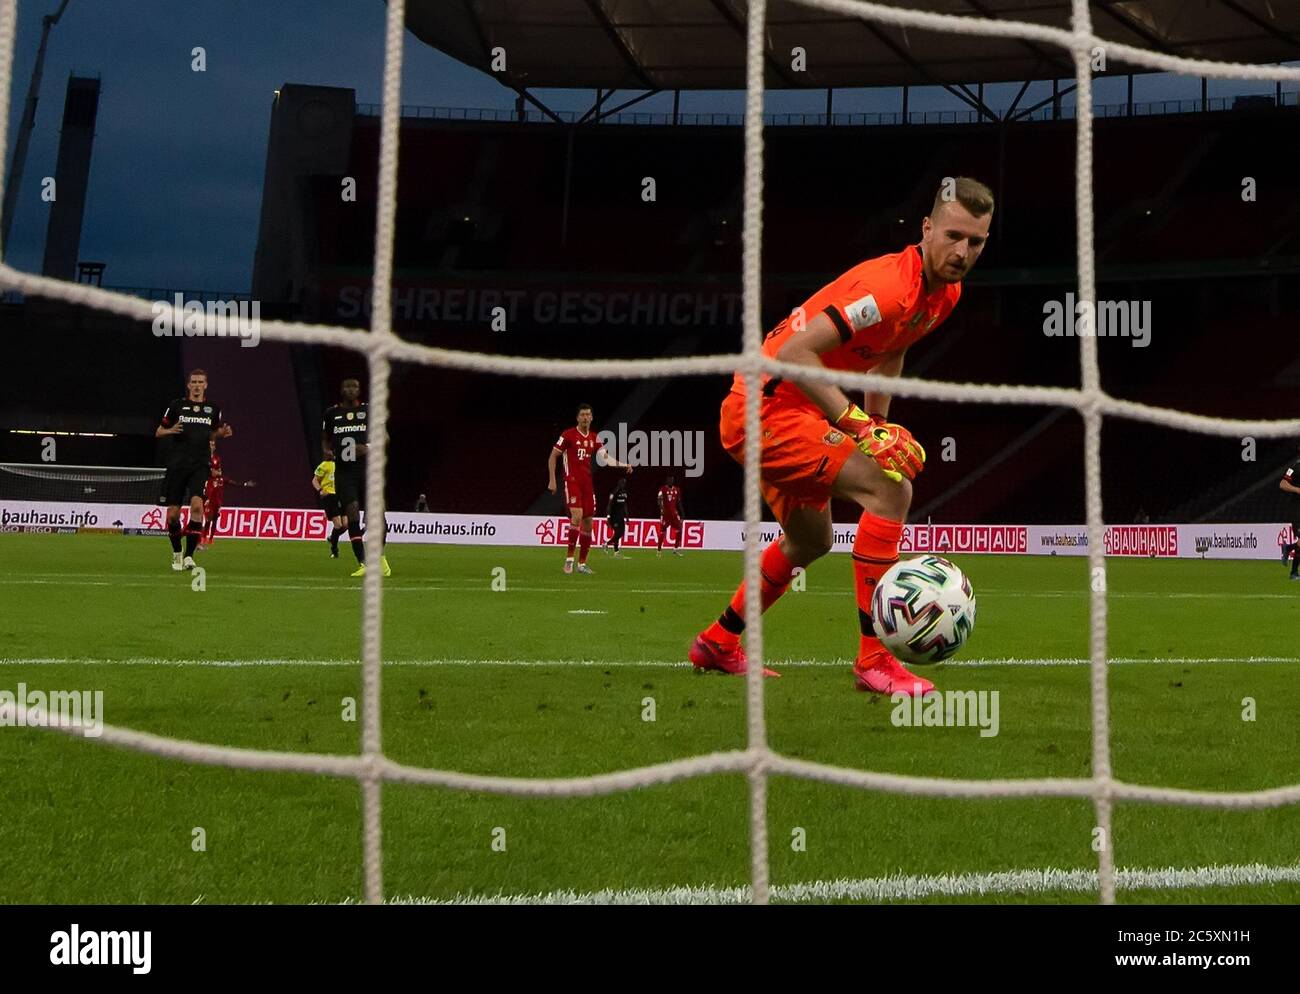 Berlin, Germany, 4 th July 2020,  Robert LEWANDOWSKI, FCB 9   scores, shoots goal for 3-0 after mistake Lukas HRADECKY, Lev 1  at the DFB Pokal Final match  FC BAYERN MUENCHEN - BAYER 04 LEVERKUSEN 4-2  in season 2019/2020 , FCB Foto: © Peter Schatz / Alamy Live News / Kevin Voigt/Jan Huebner/Pool   - DFB REGULATIONS PROHIBIT ANY USE OF PHOTOGRAPHS as IMAGE SEQUENCES and/or QUASI-VIDEO -  National and international News-Agencies OUT Editorial Use ONLY Stock Photo